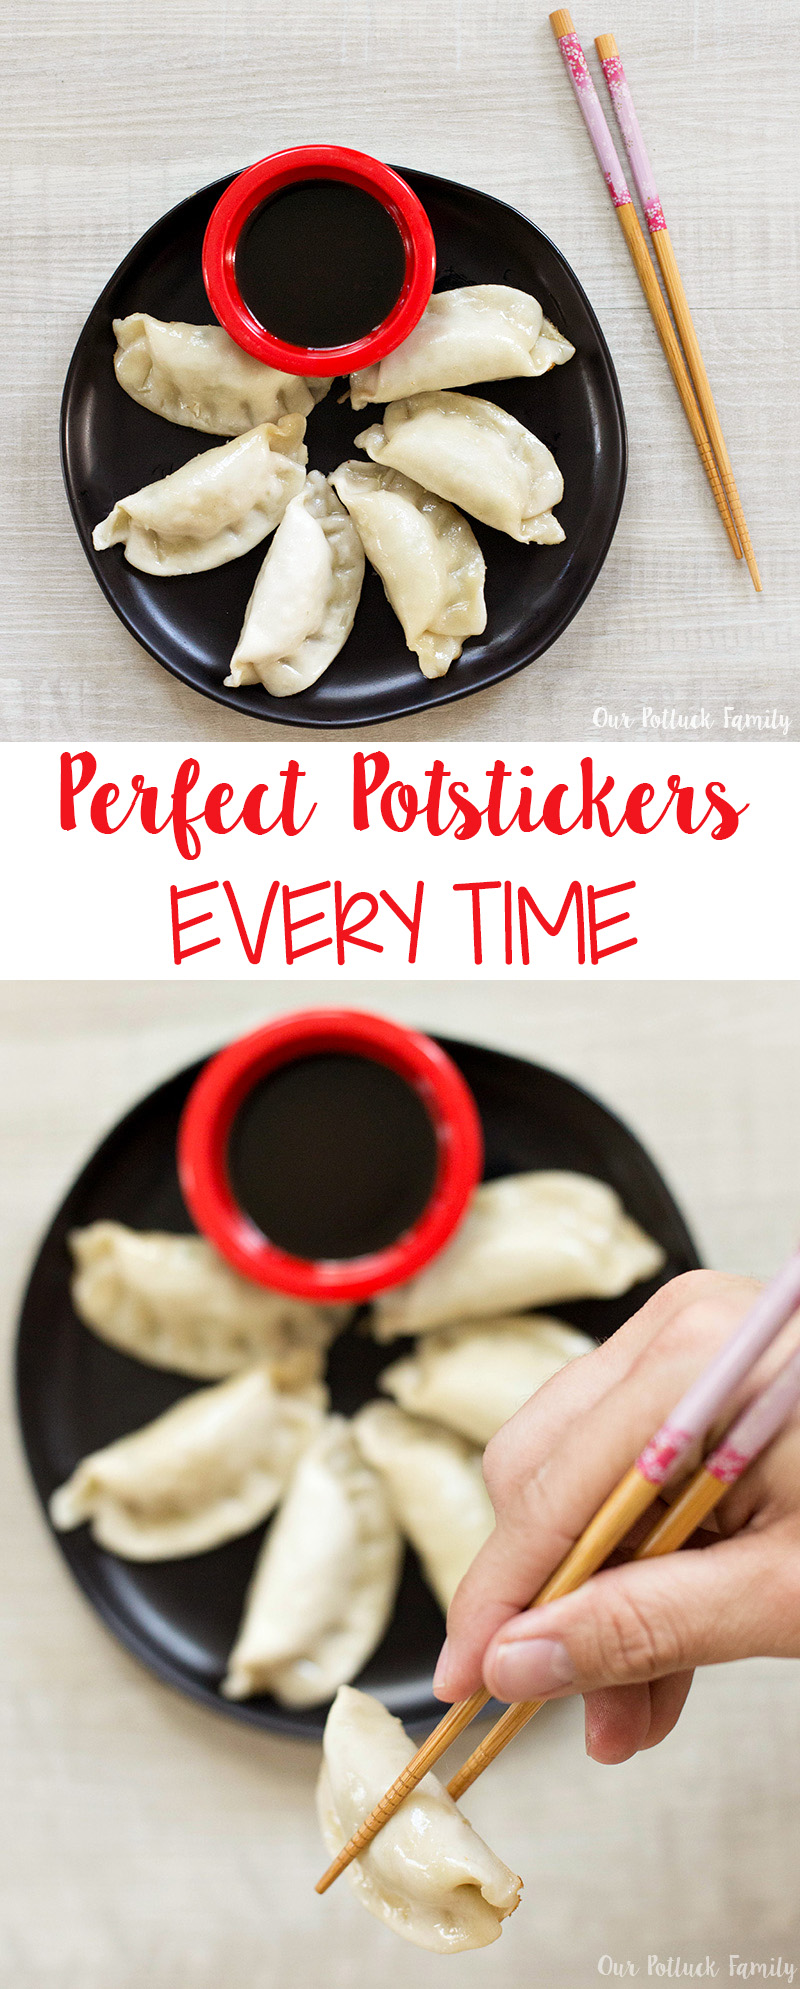 Perfect Potstickers Every Time